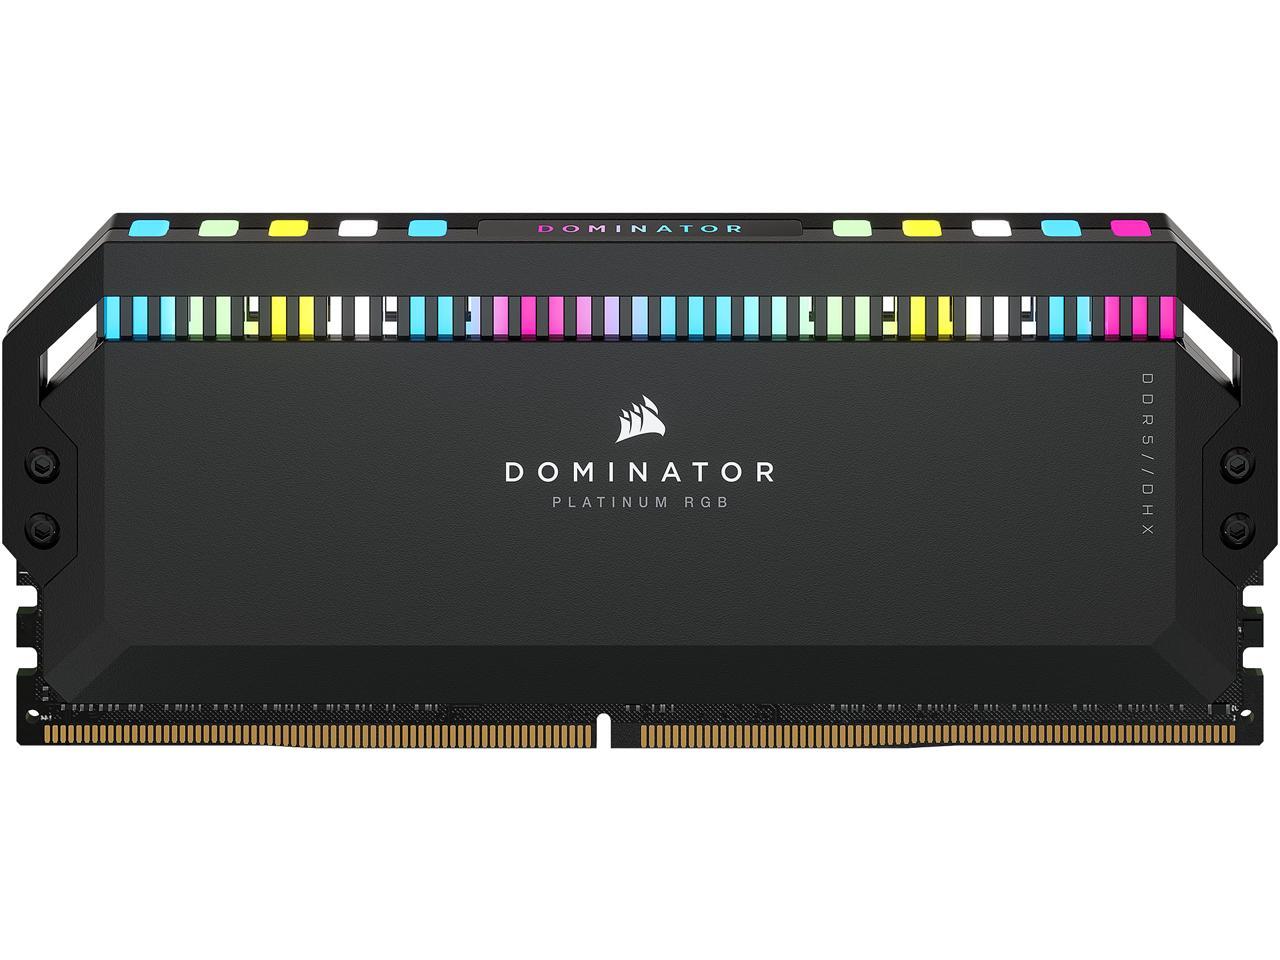 DDR4 and DDR5 module prices expected to drop by up to 5% in Q2 2022